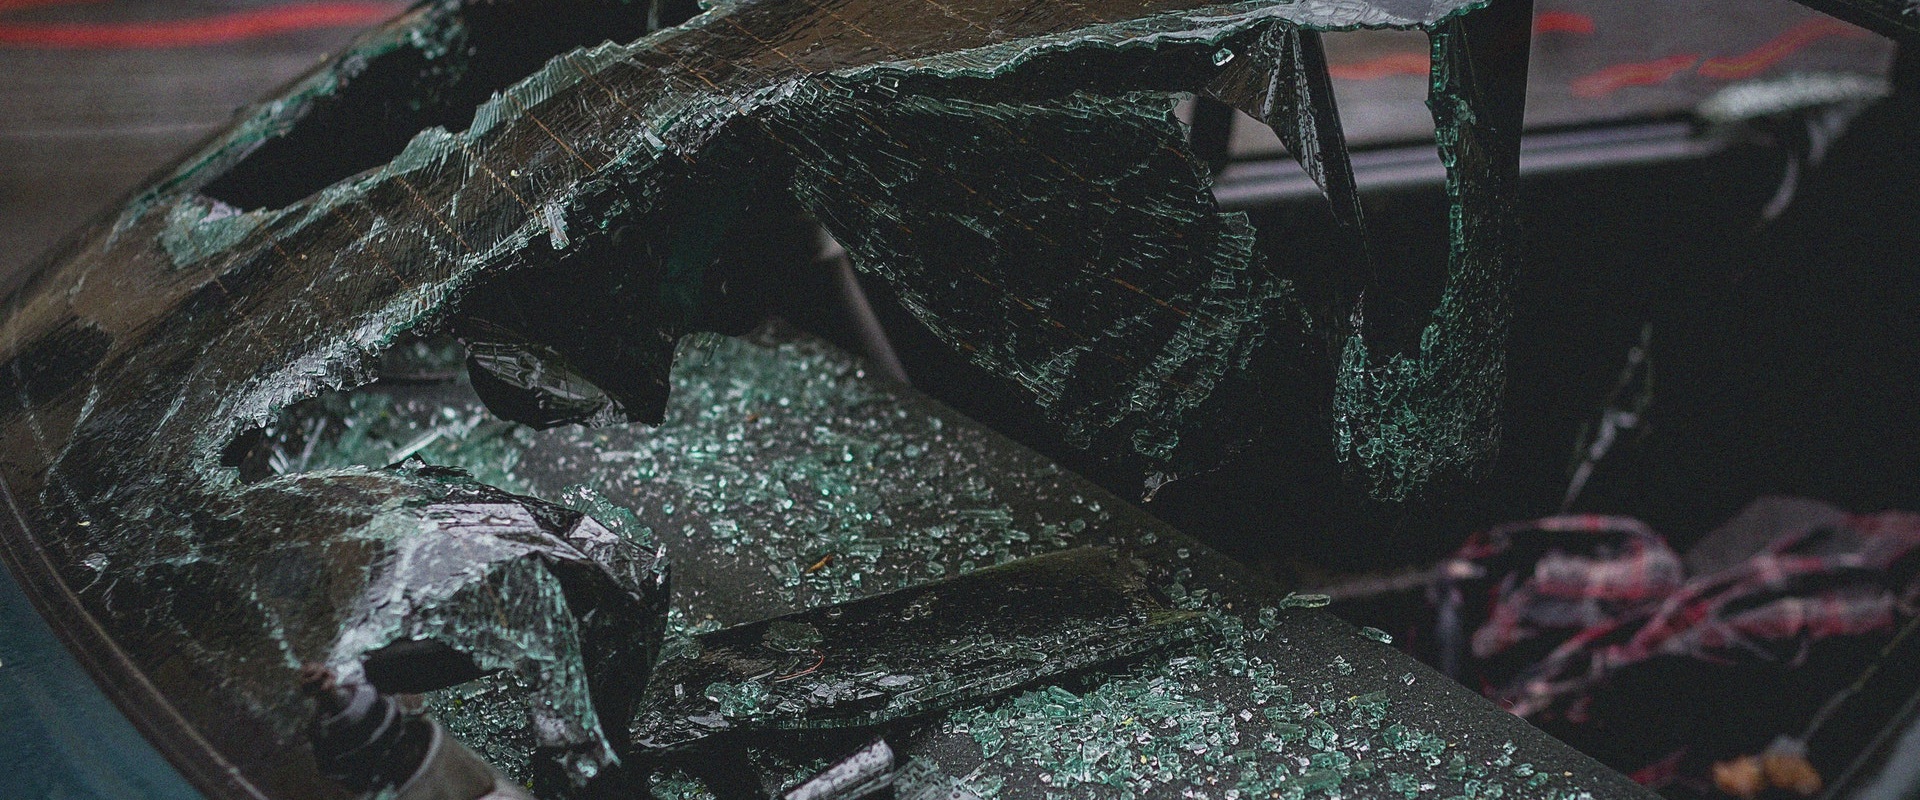 Does Car Insurance Cover a Cracked Windshield?